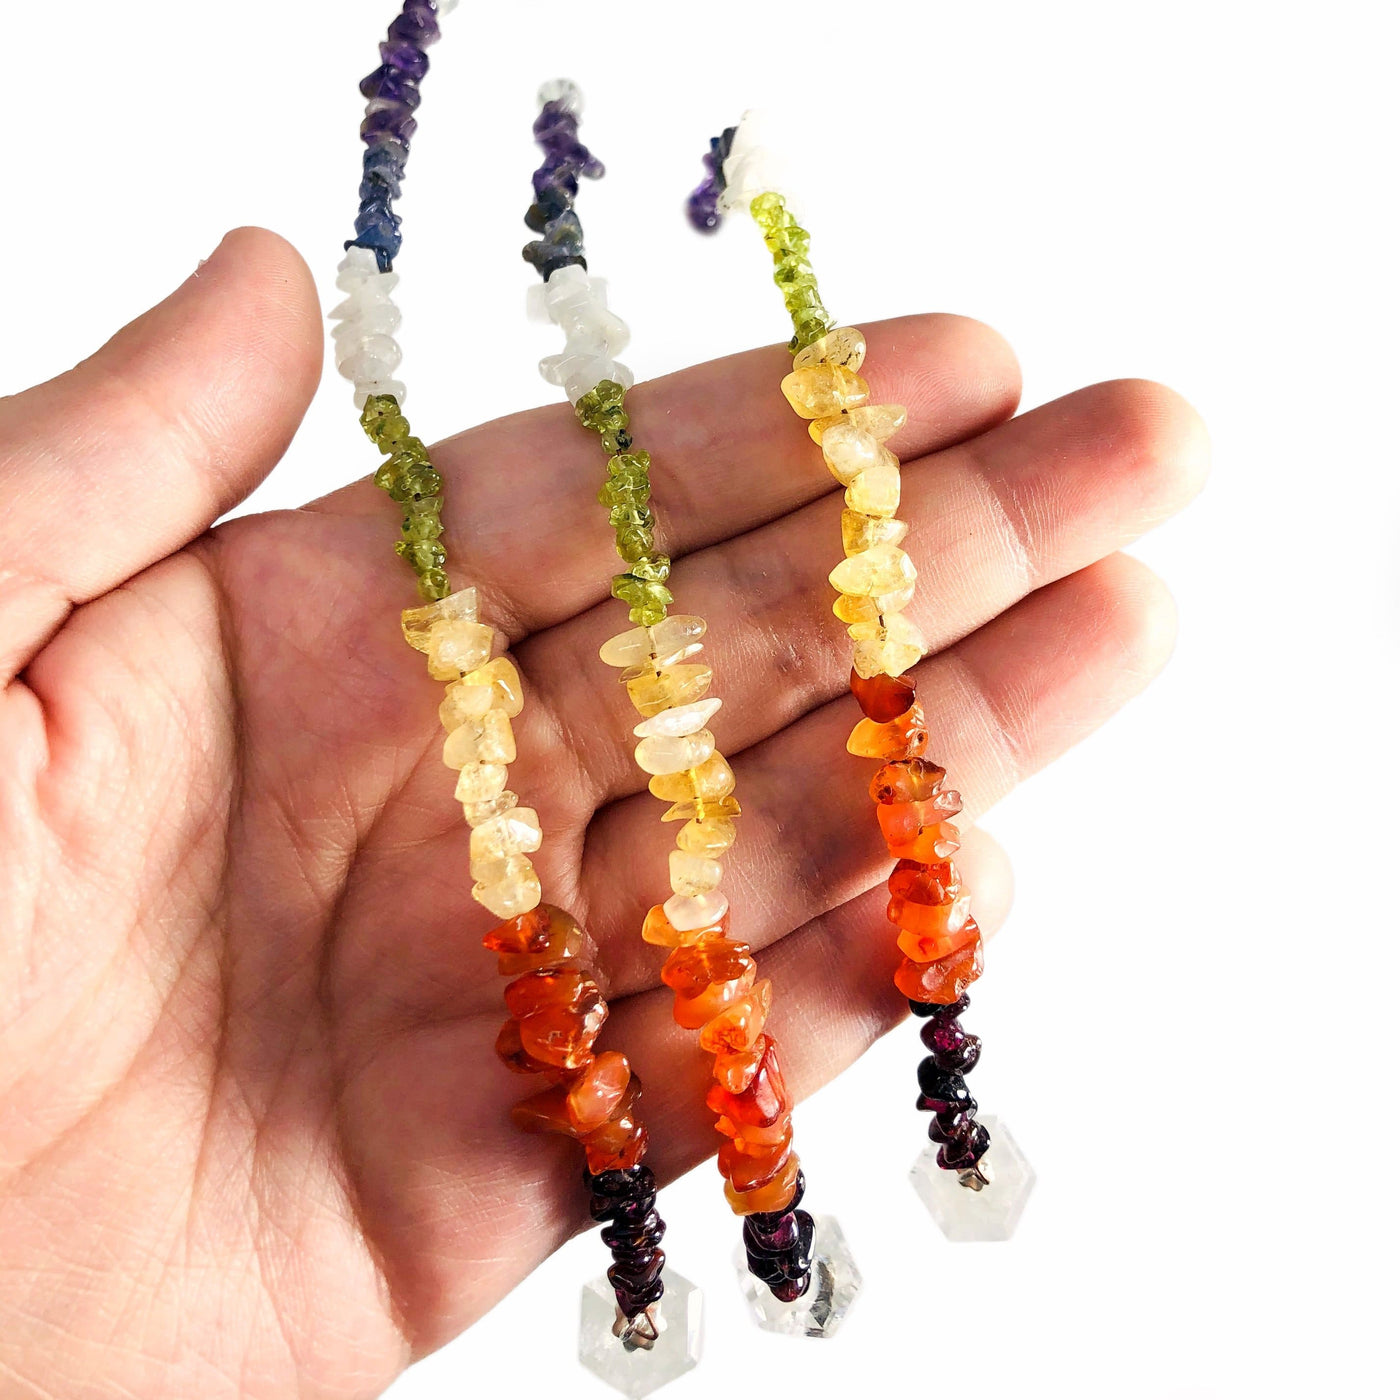 Crystal Quartz Pendulum with Chakra Beads  - close up of beads in a hand